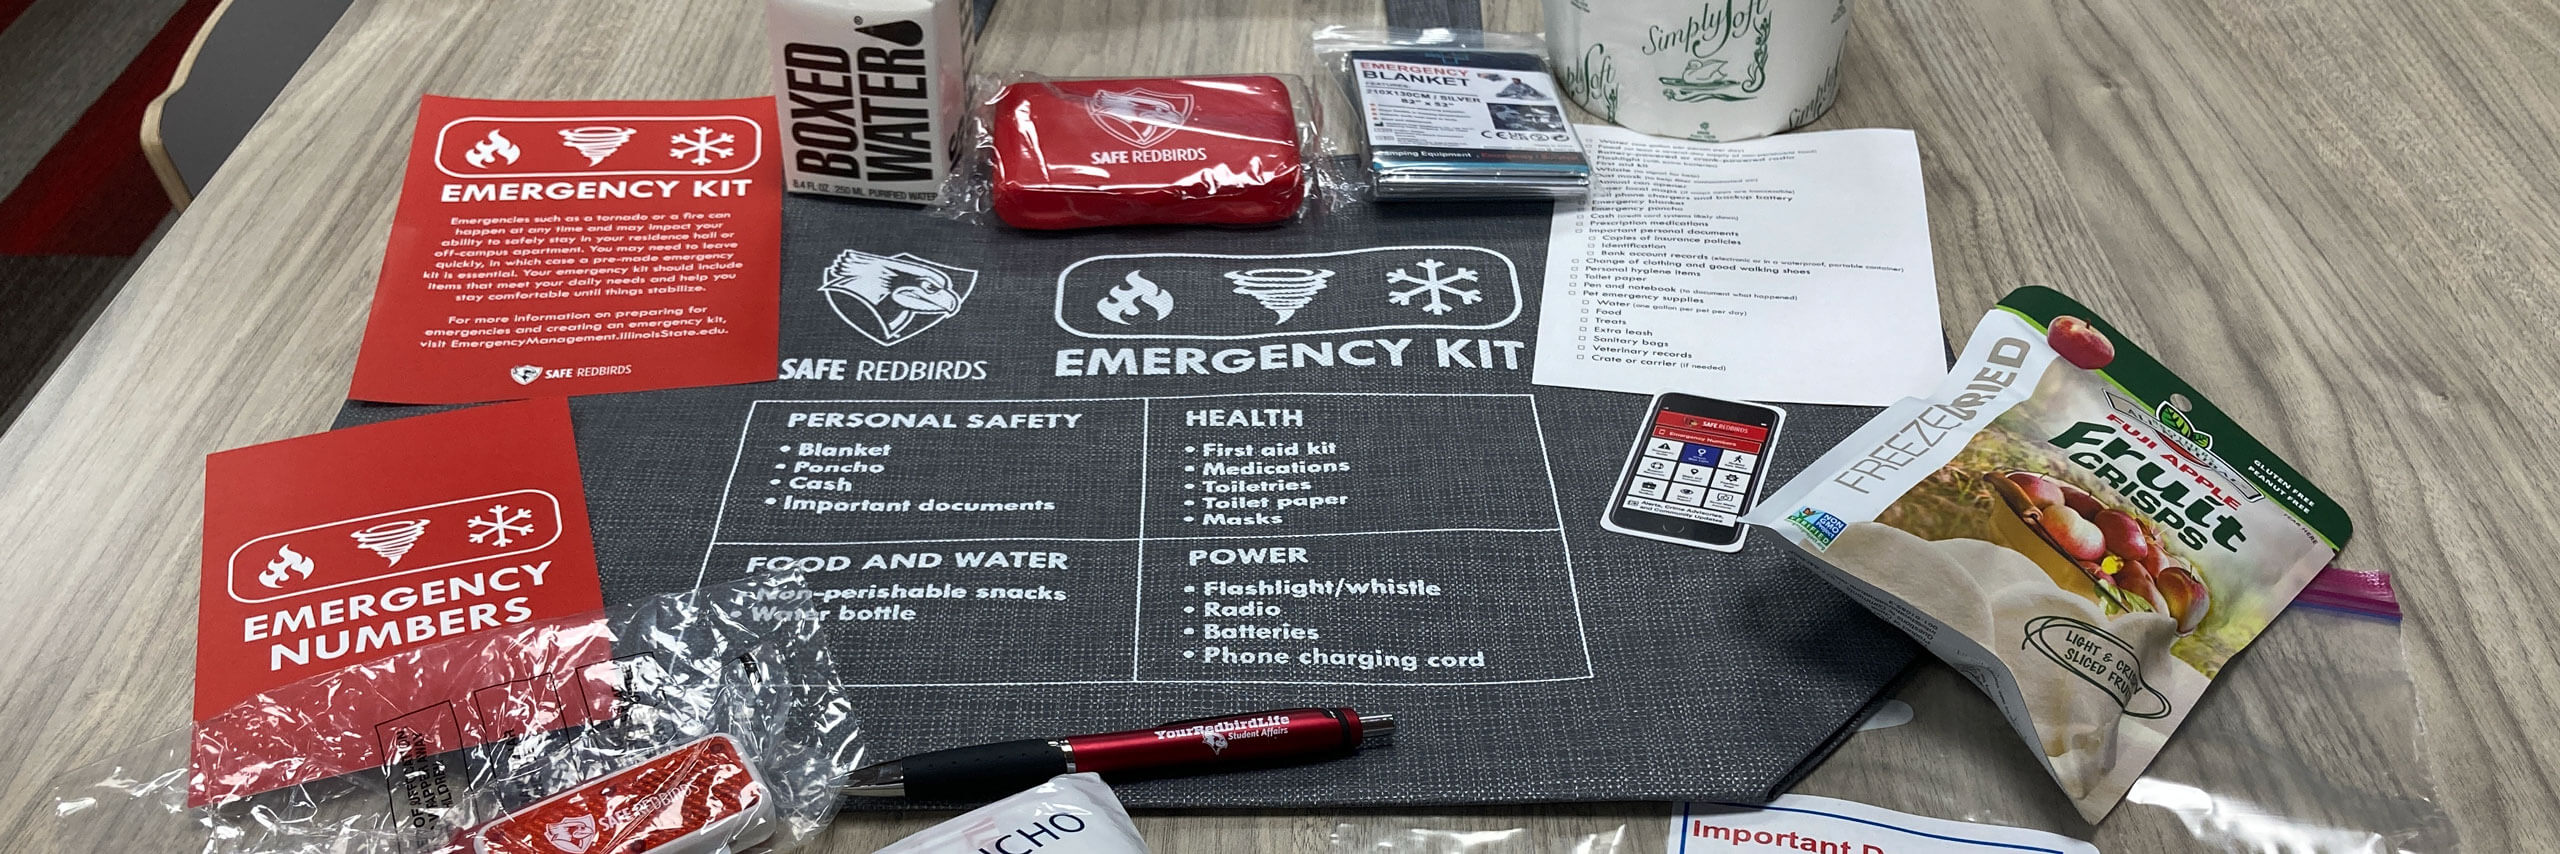 An Emergency Kit is laid out on a table.